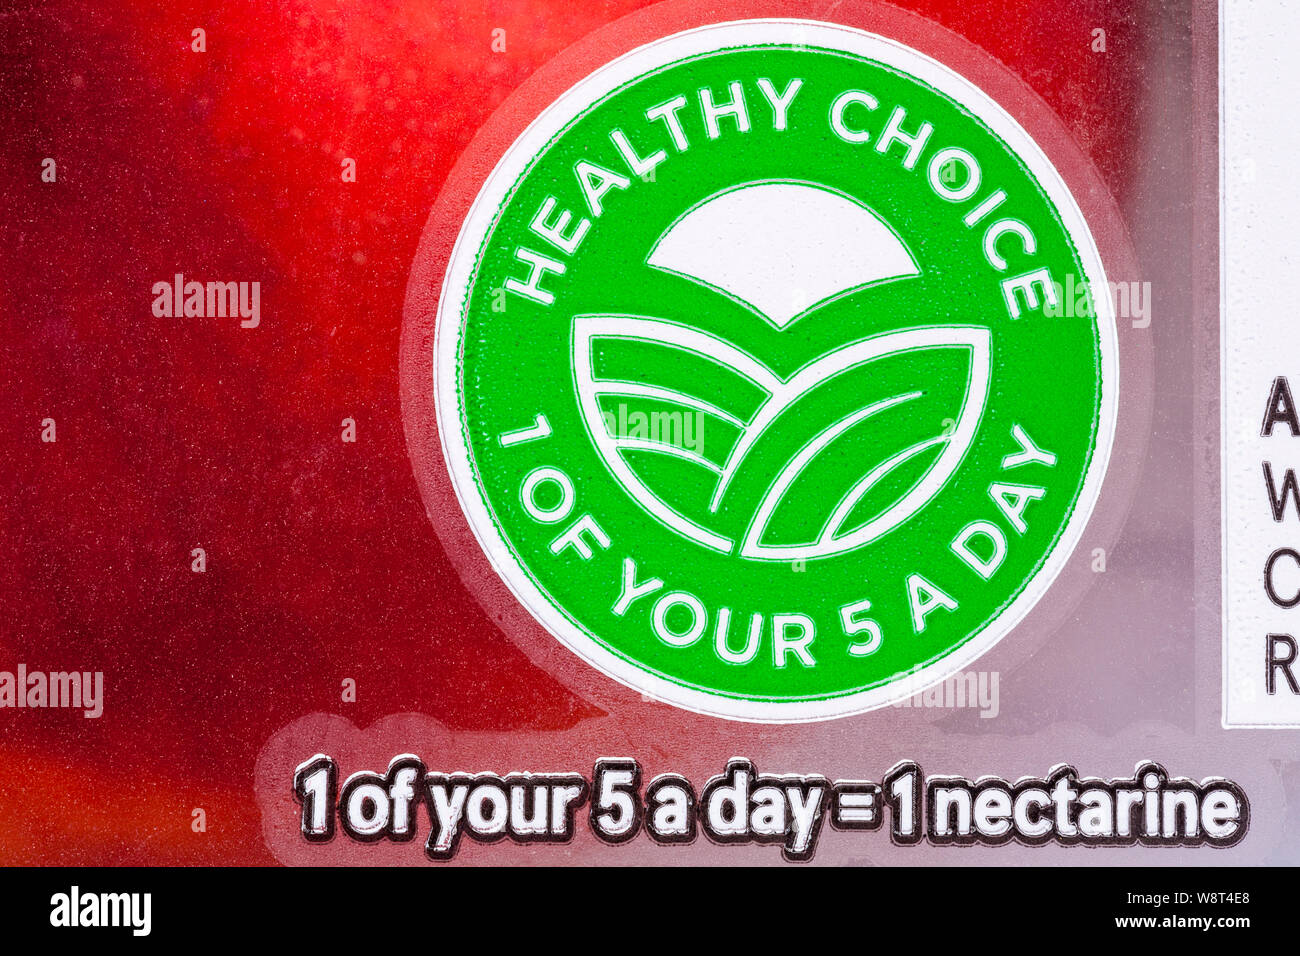 Healthy Choice 1 of your 5 a day = 1 nectarine - detail on punnet of nectarines fruit Stock Photo